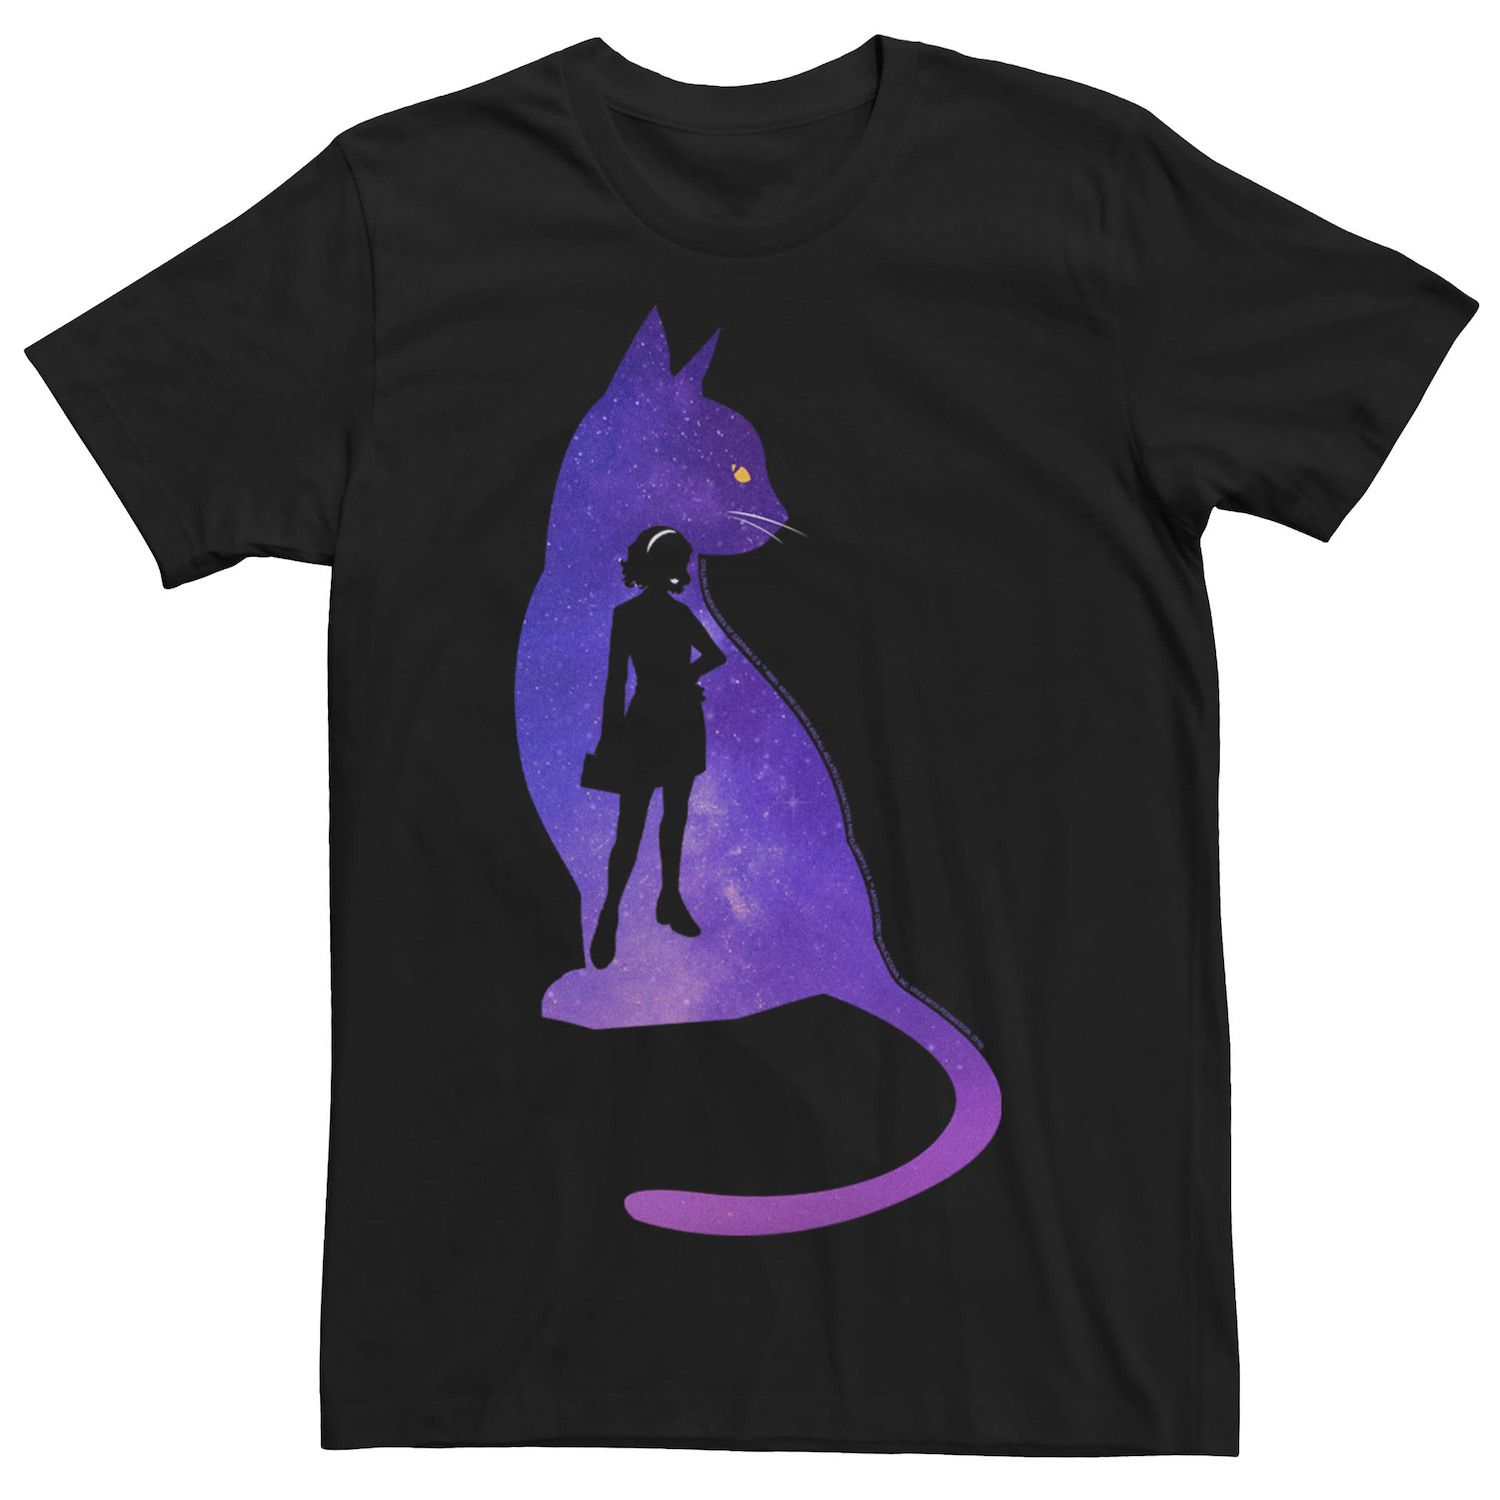 Image for Licensed Character Men's The Chilling Adventures Of Sabrina Cosmic Silhouette Tee at Kohl's.